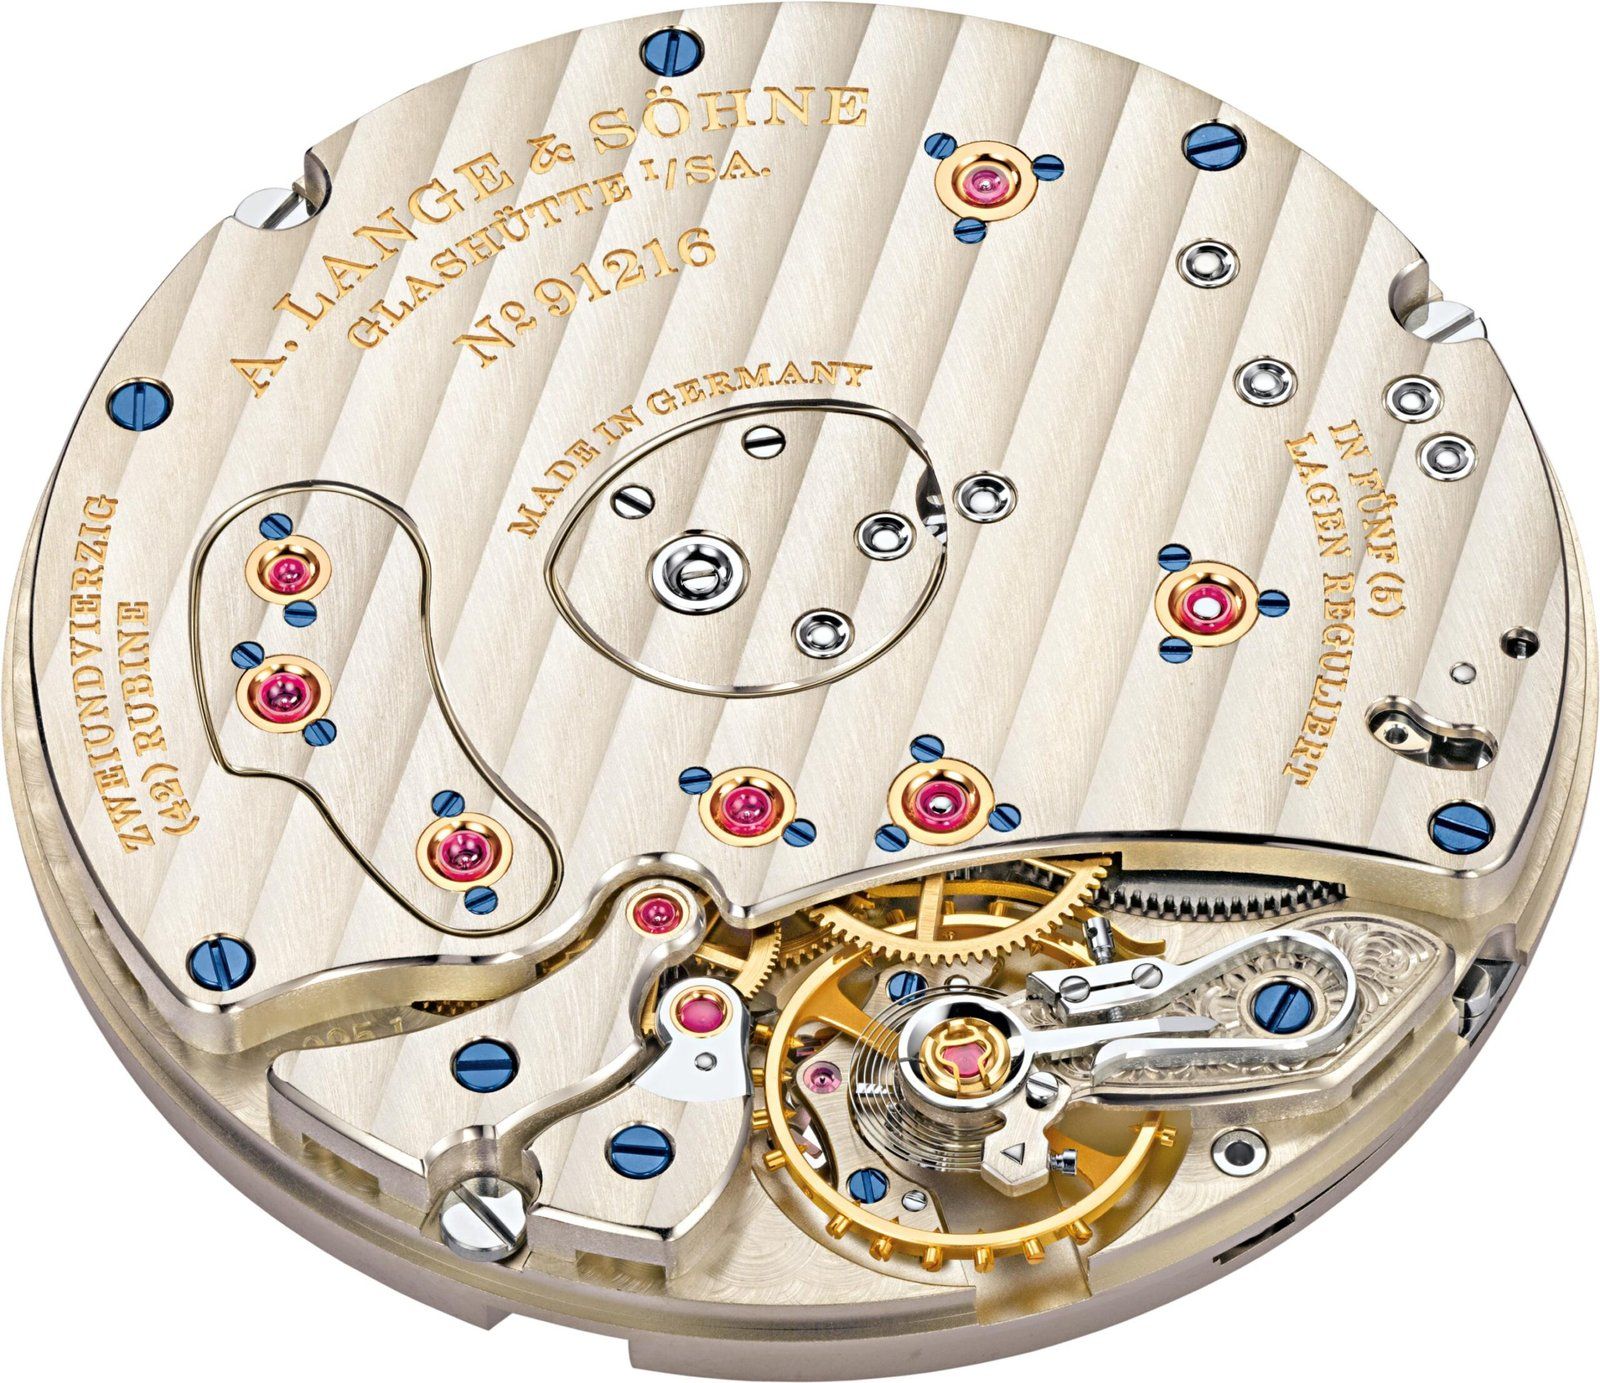 The mechanism behind the Grand Lange 1, visible through the sapphire crystal caseback